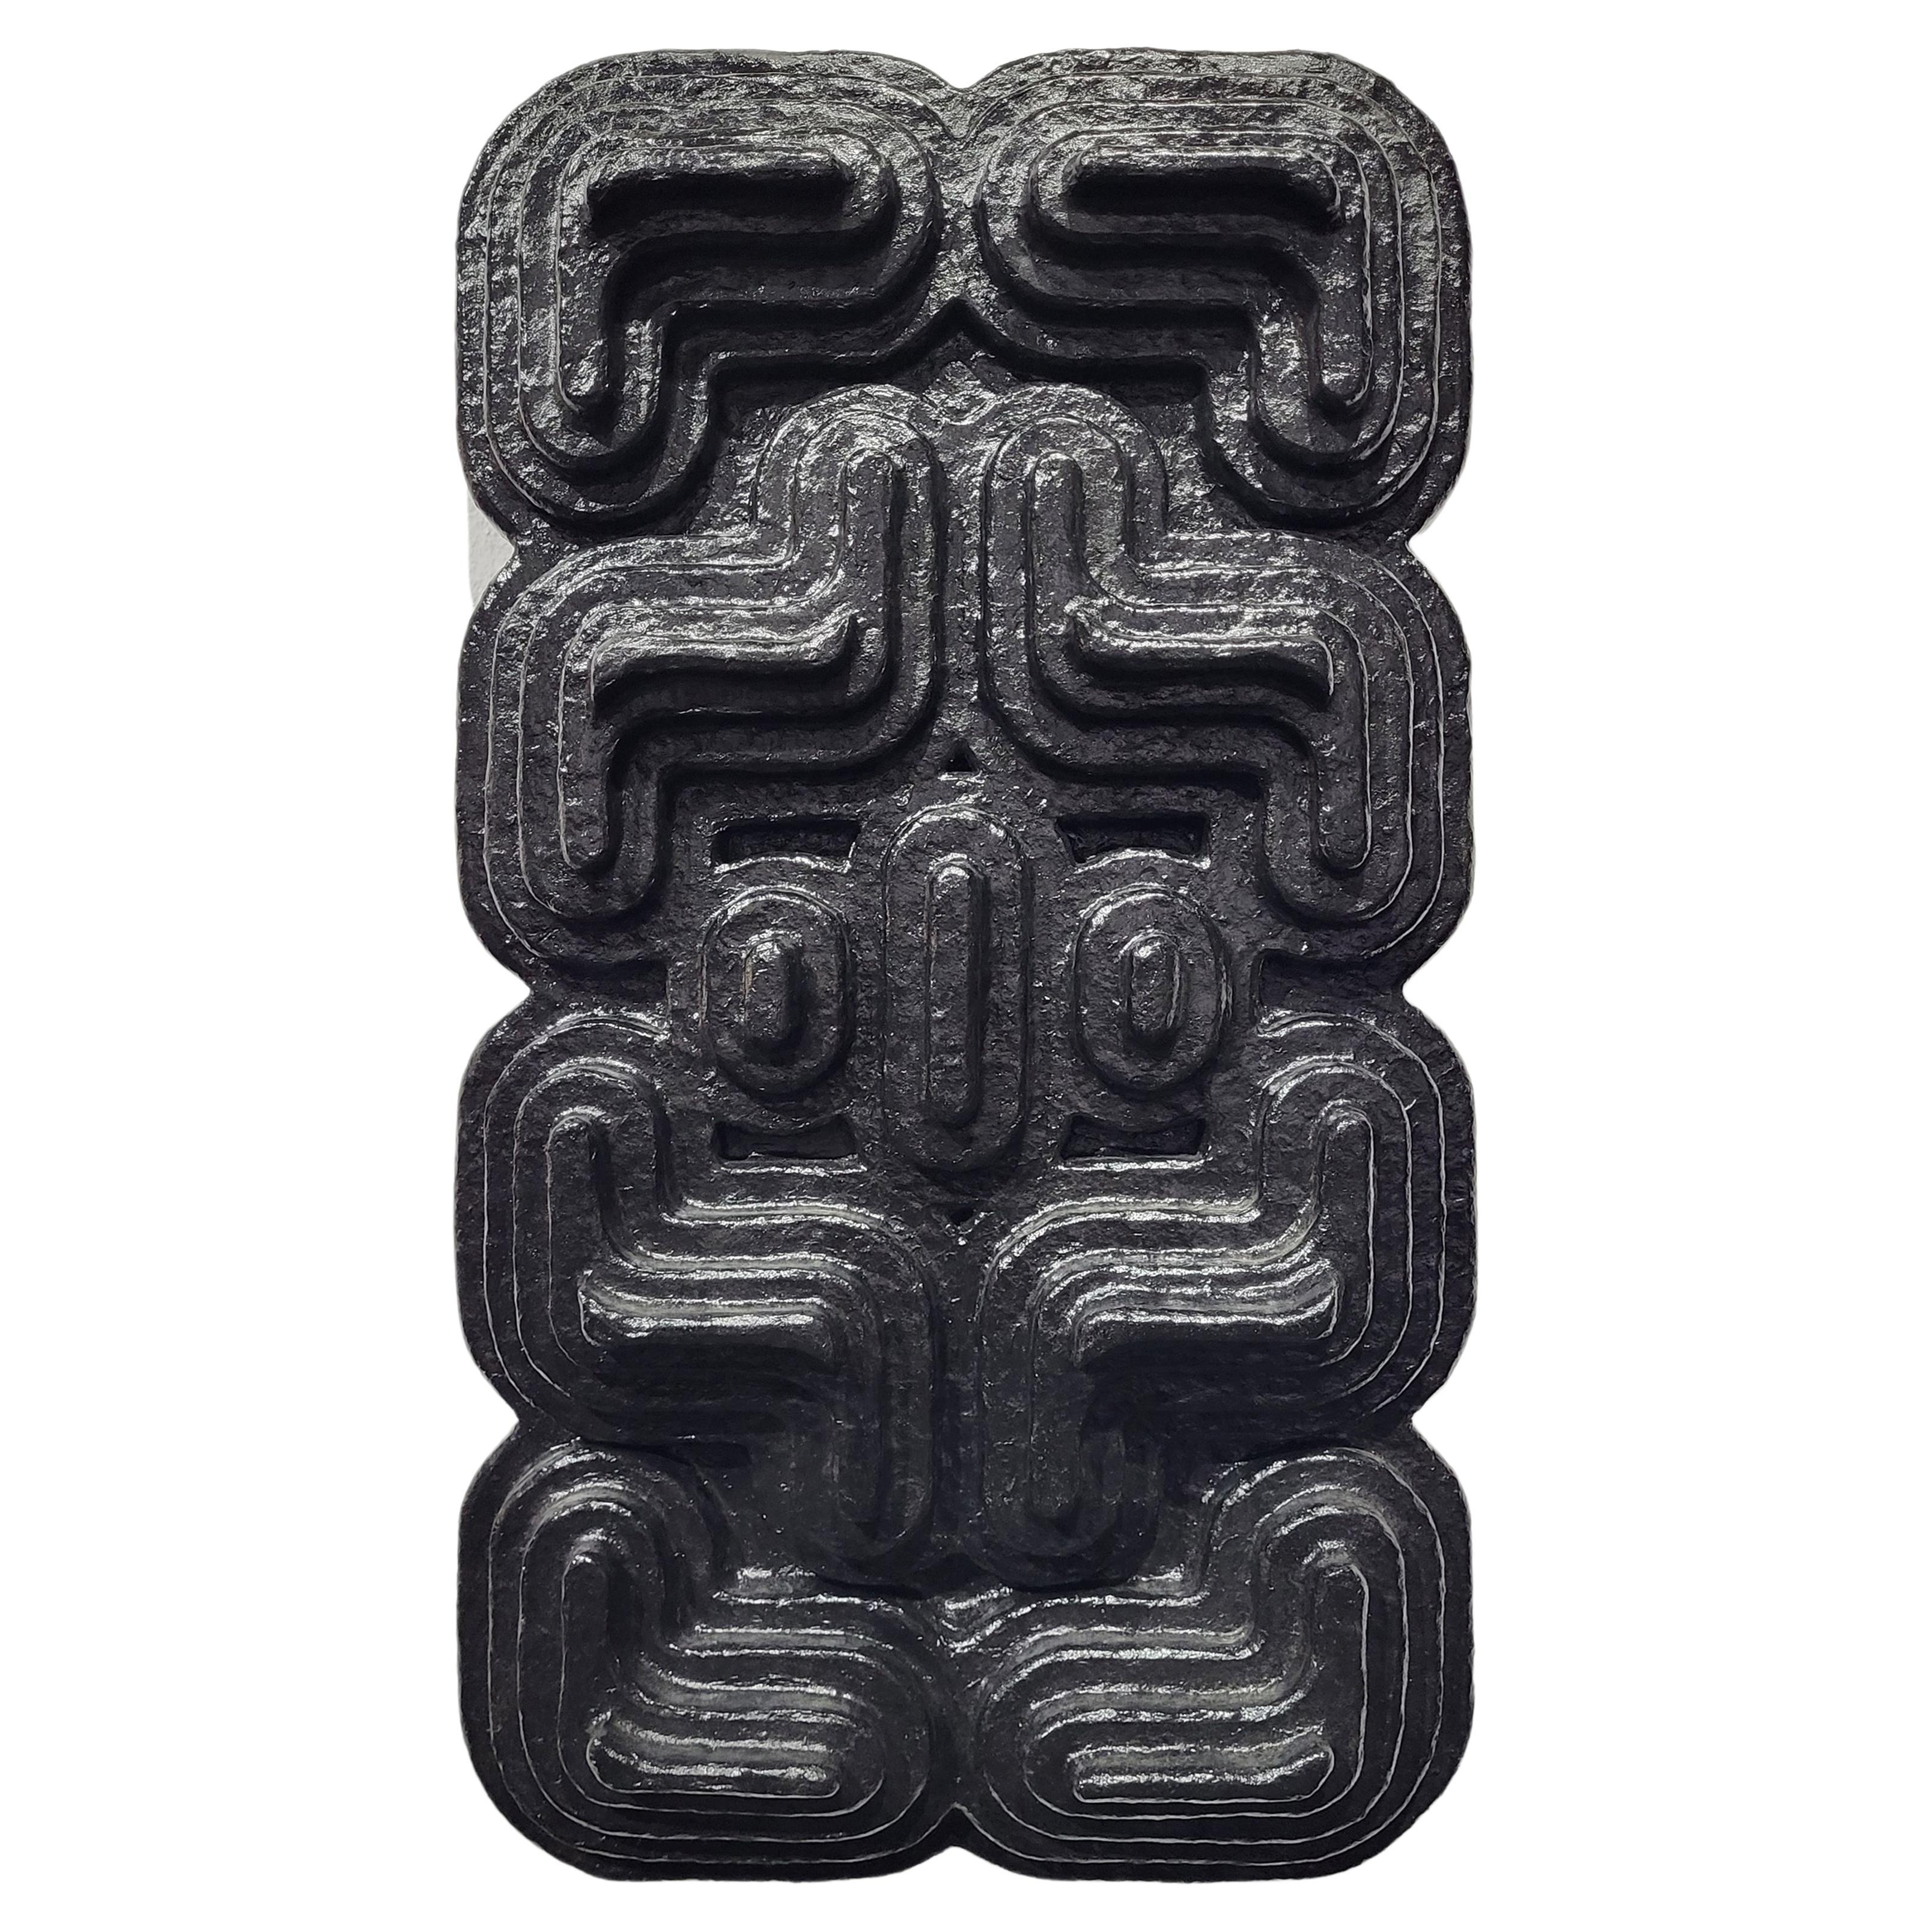 Wall Sculpture Black Contemporary Geometric Totem Brutalist Wood Paper Pulp  For Sale